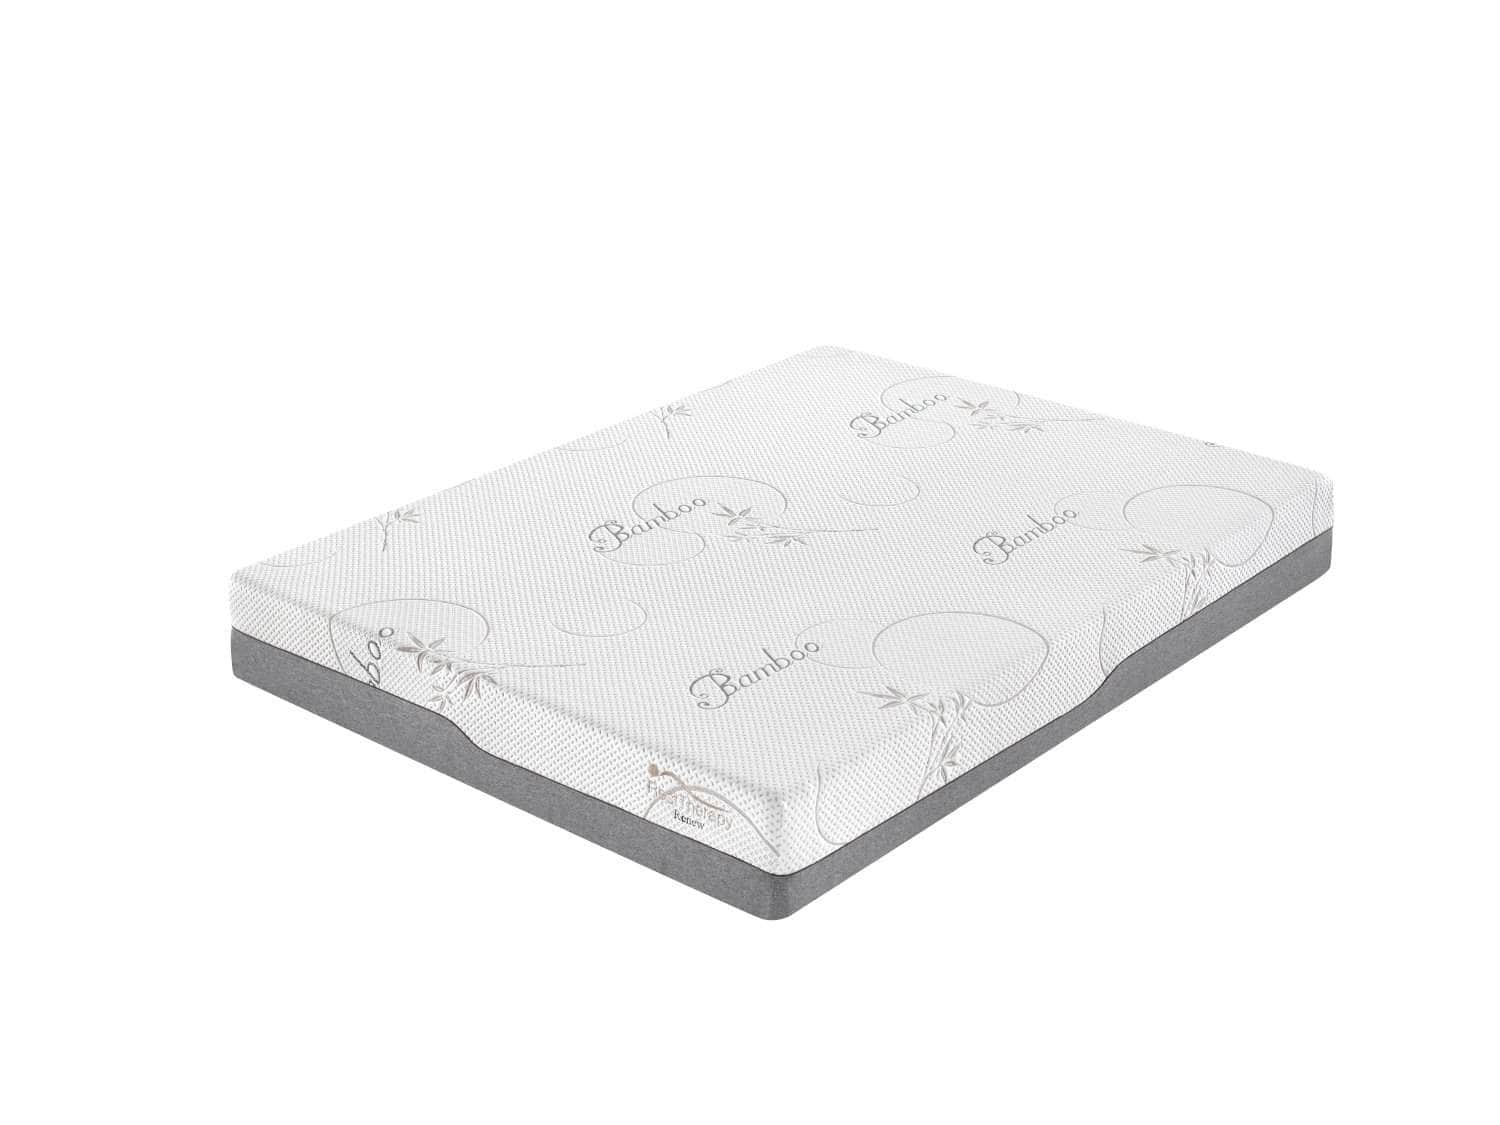 Rest Therapy Mattress Full 10" Renew Cool Gel Memory Foam Twin, Full, Queen, or King Size Bed Mattresses